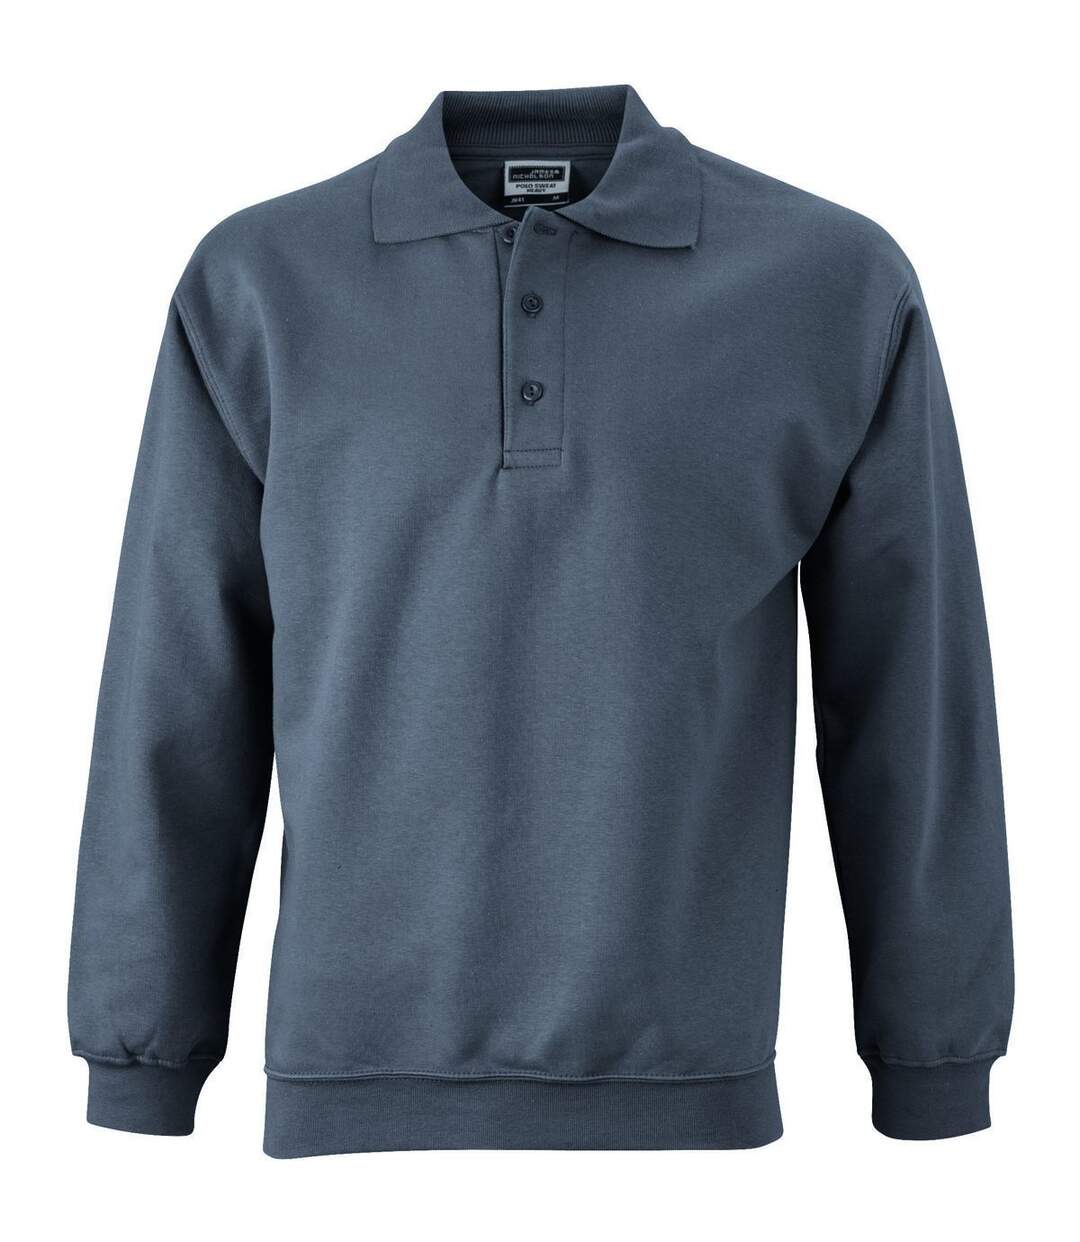 Sweat-shirt col polo - homme - JN041 - gris carbone